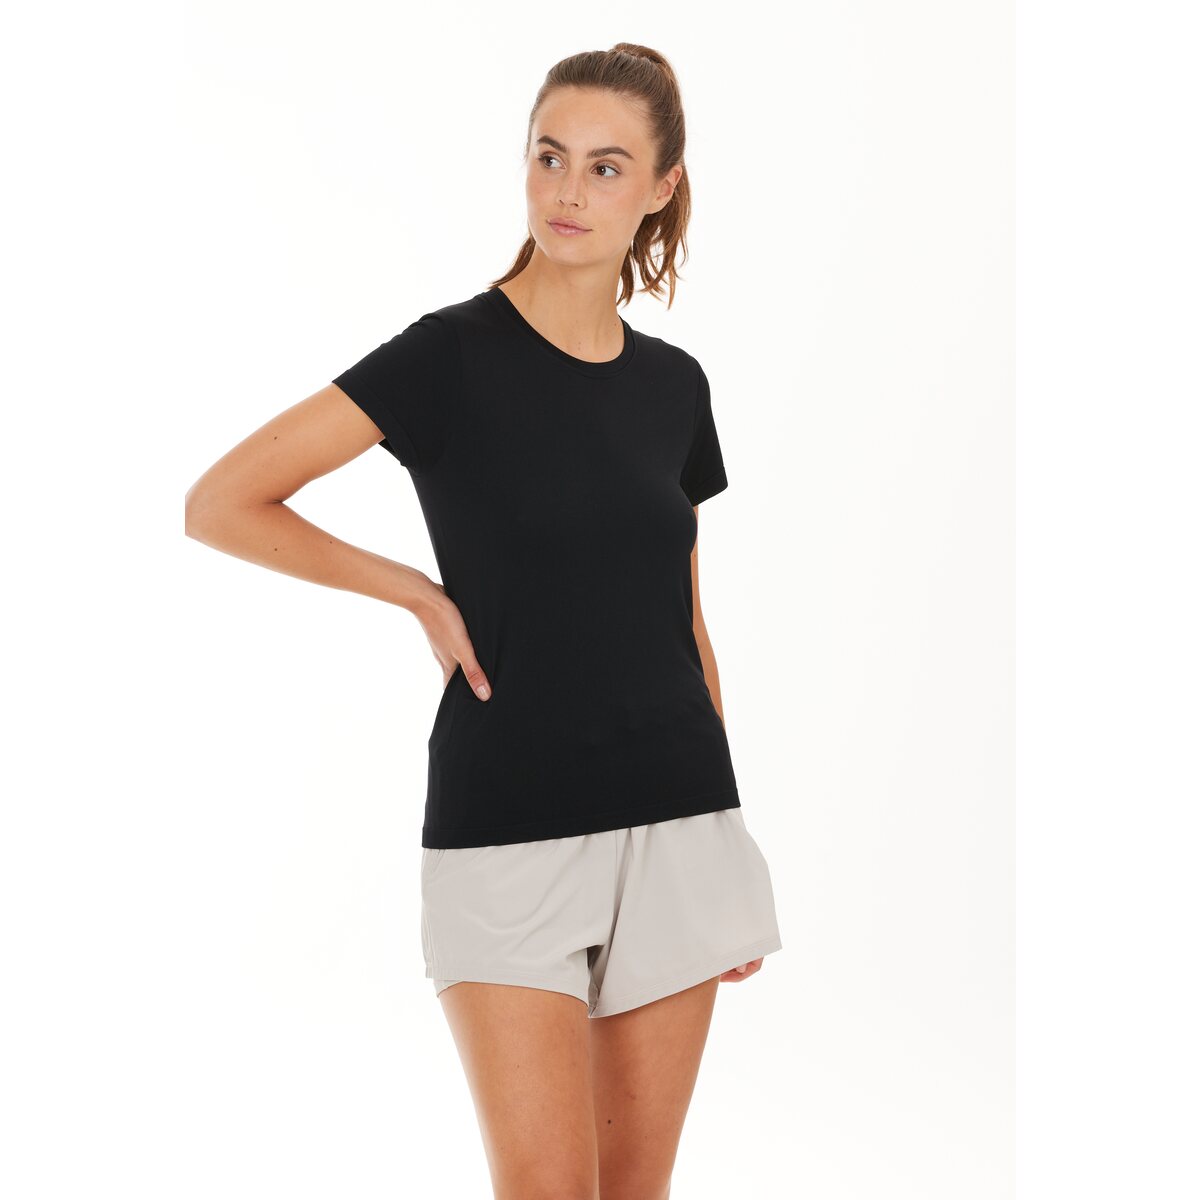 Athlecia Julee Womenswear Loose Fit Seamless Tee - Black 1 Shaws Department Stores